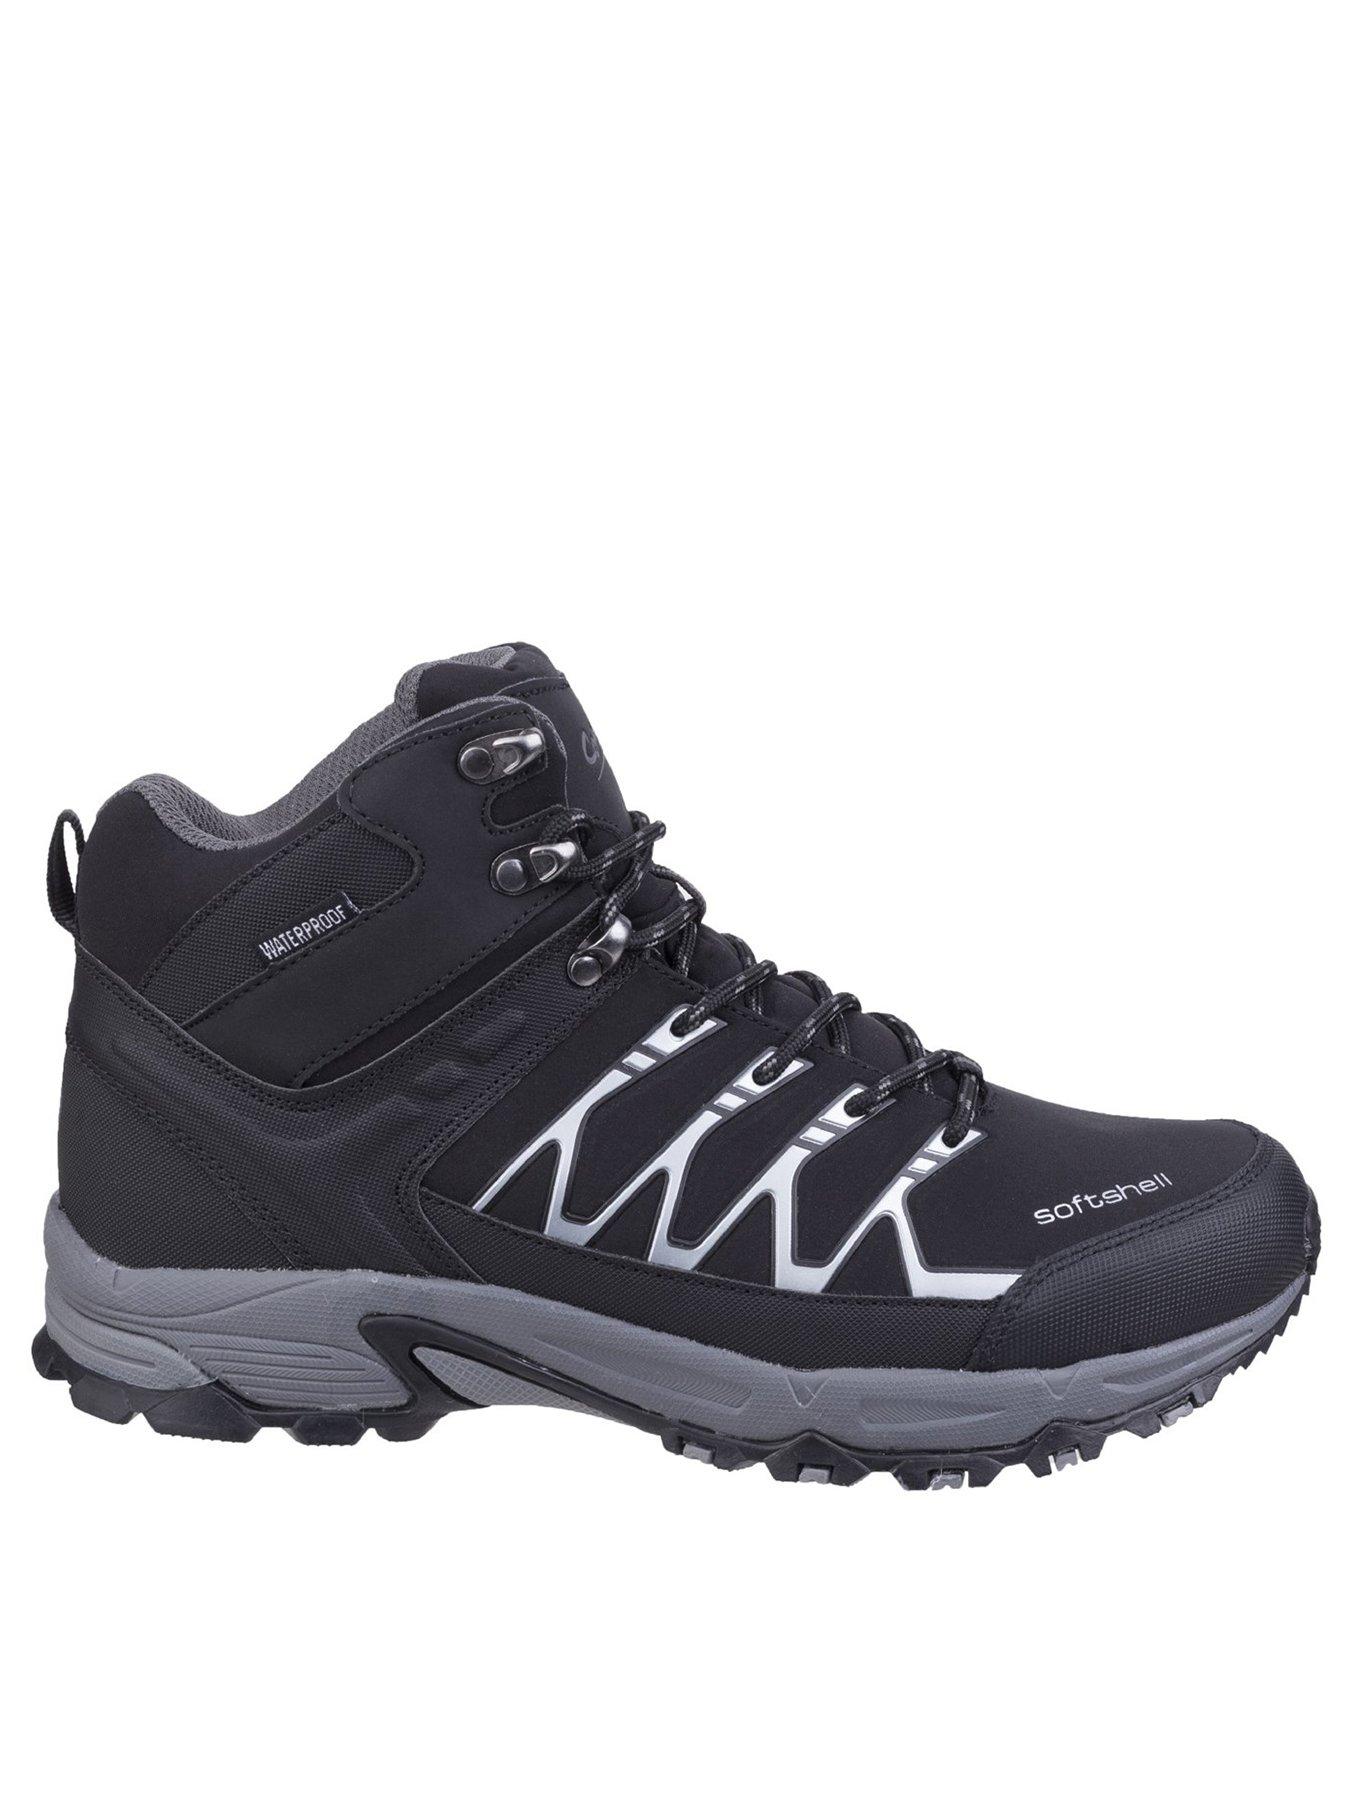 Cotswold Abbeydale Mid Mens Soft Shell Hiking Boot - Black | very.co.uk